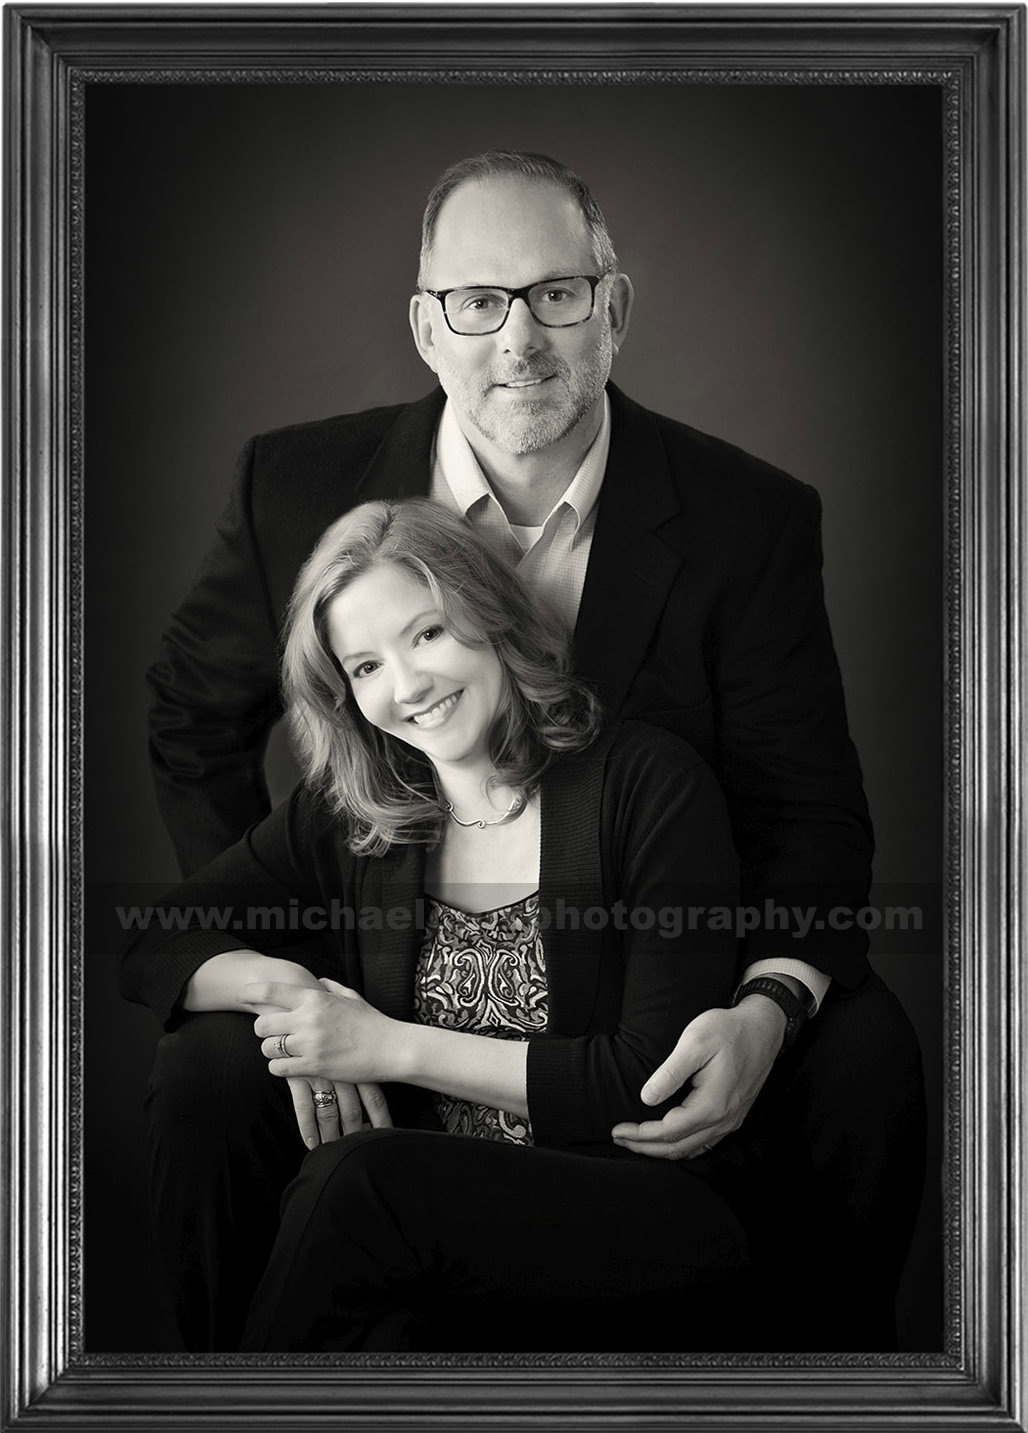 Couples and Relationship BW Portraits